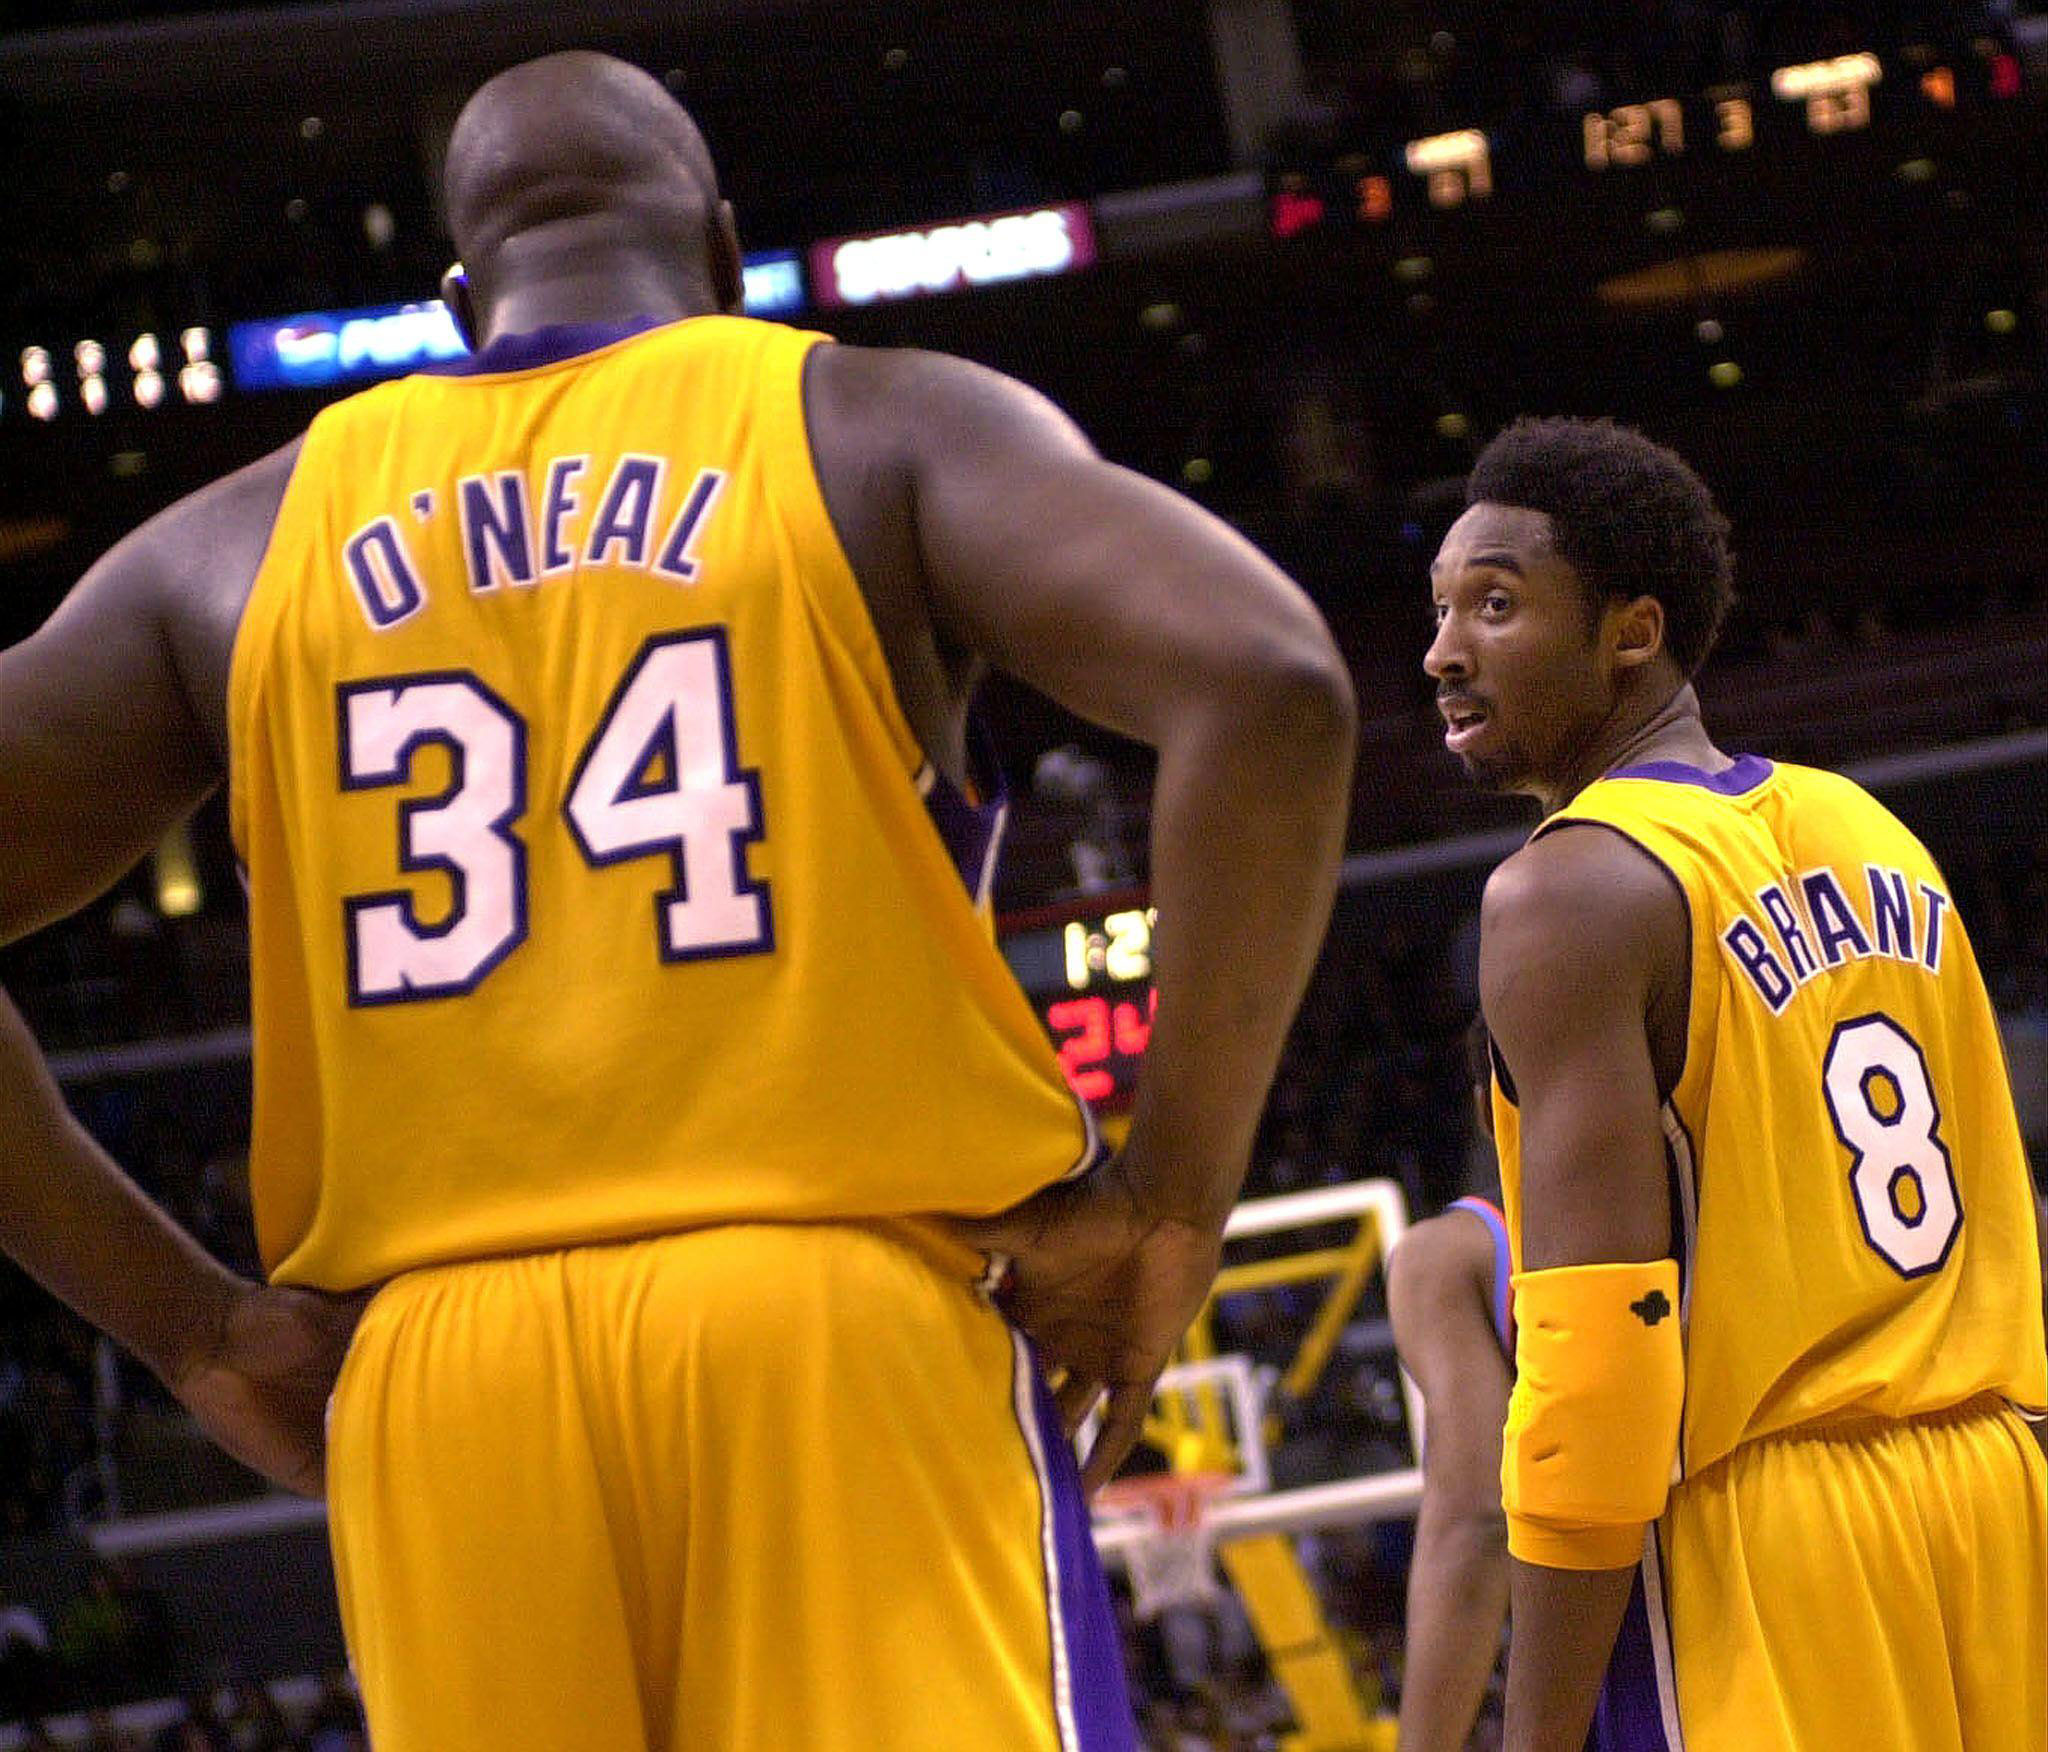 Kobe Bryant of the Los Angeles Lakers looks back toward teammate Shaquille O'Neal during their game against the Cleveland Cavaliers